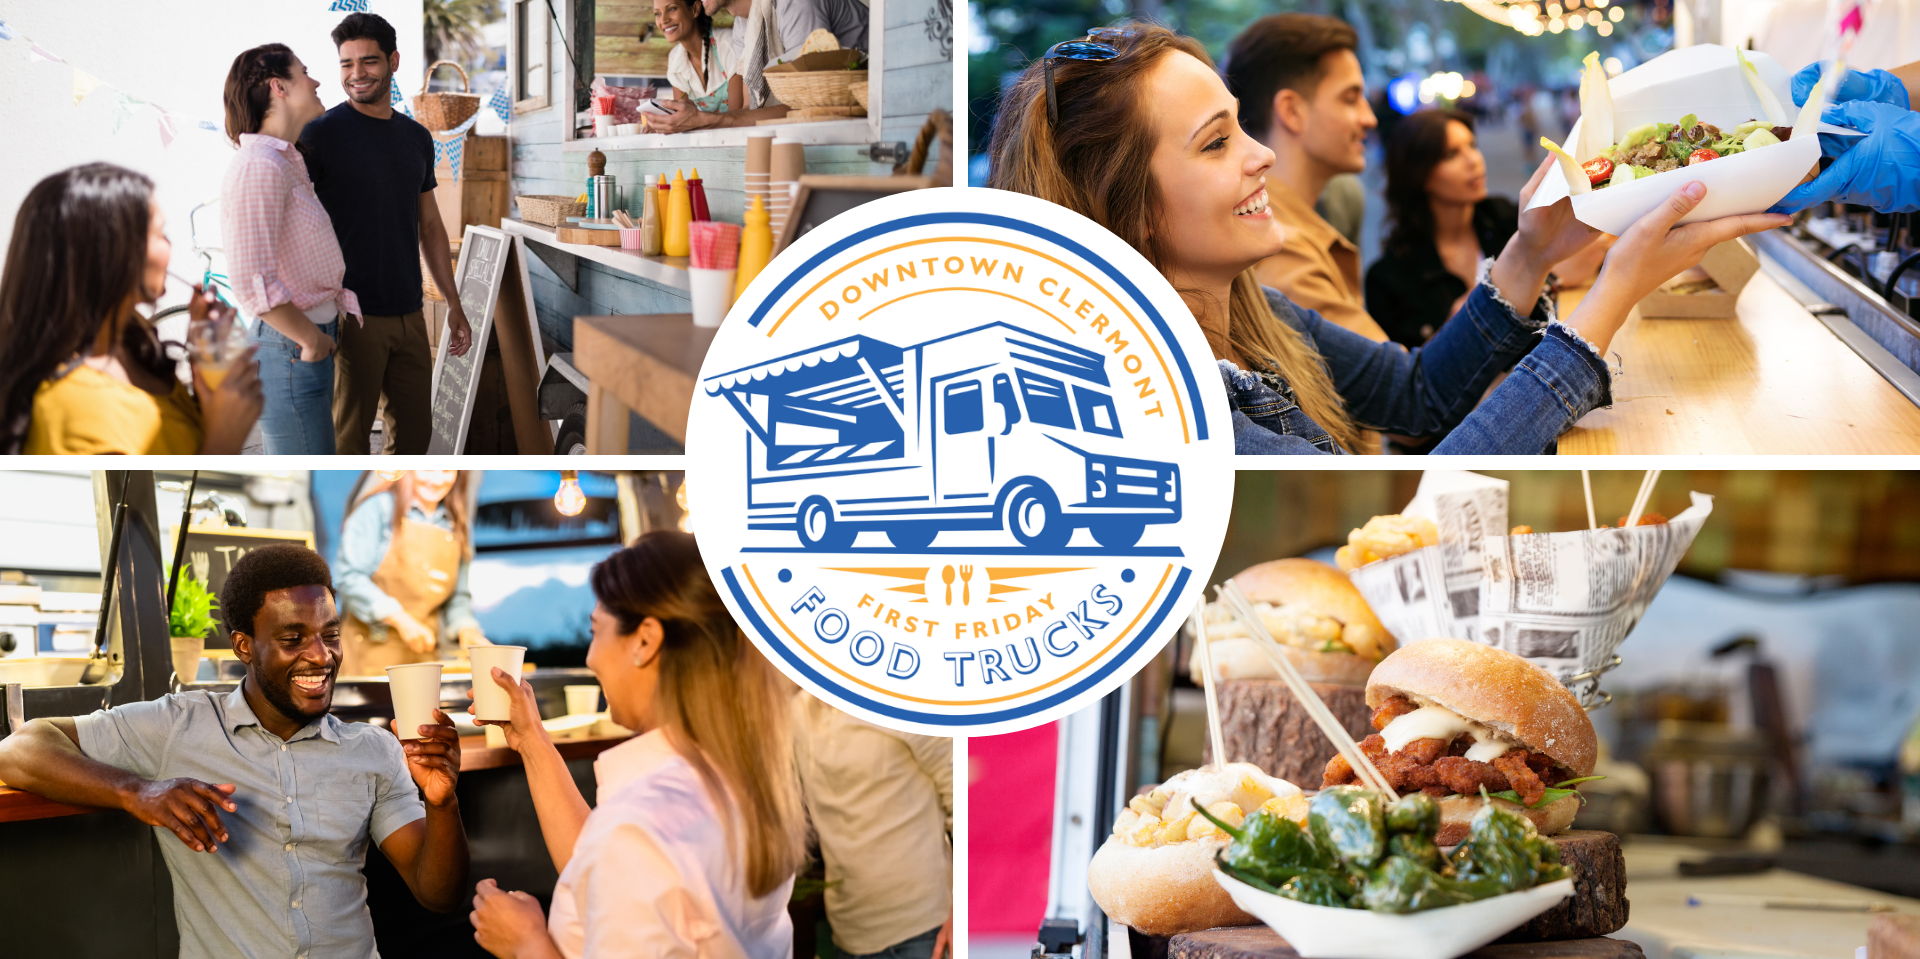 Downtown Clermont First Friday Food Trucks promotional image